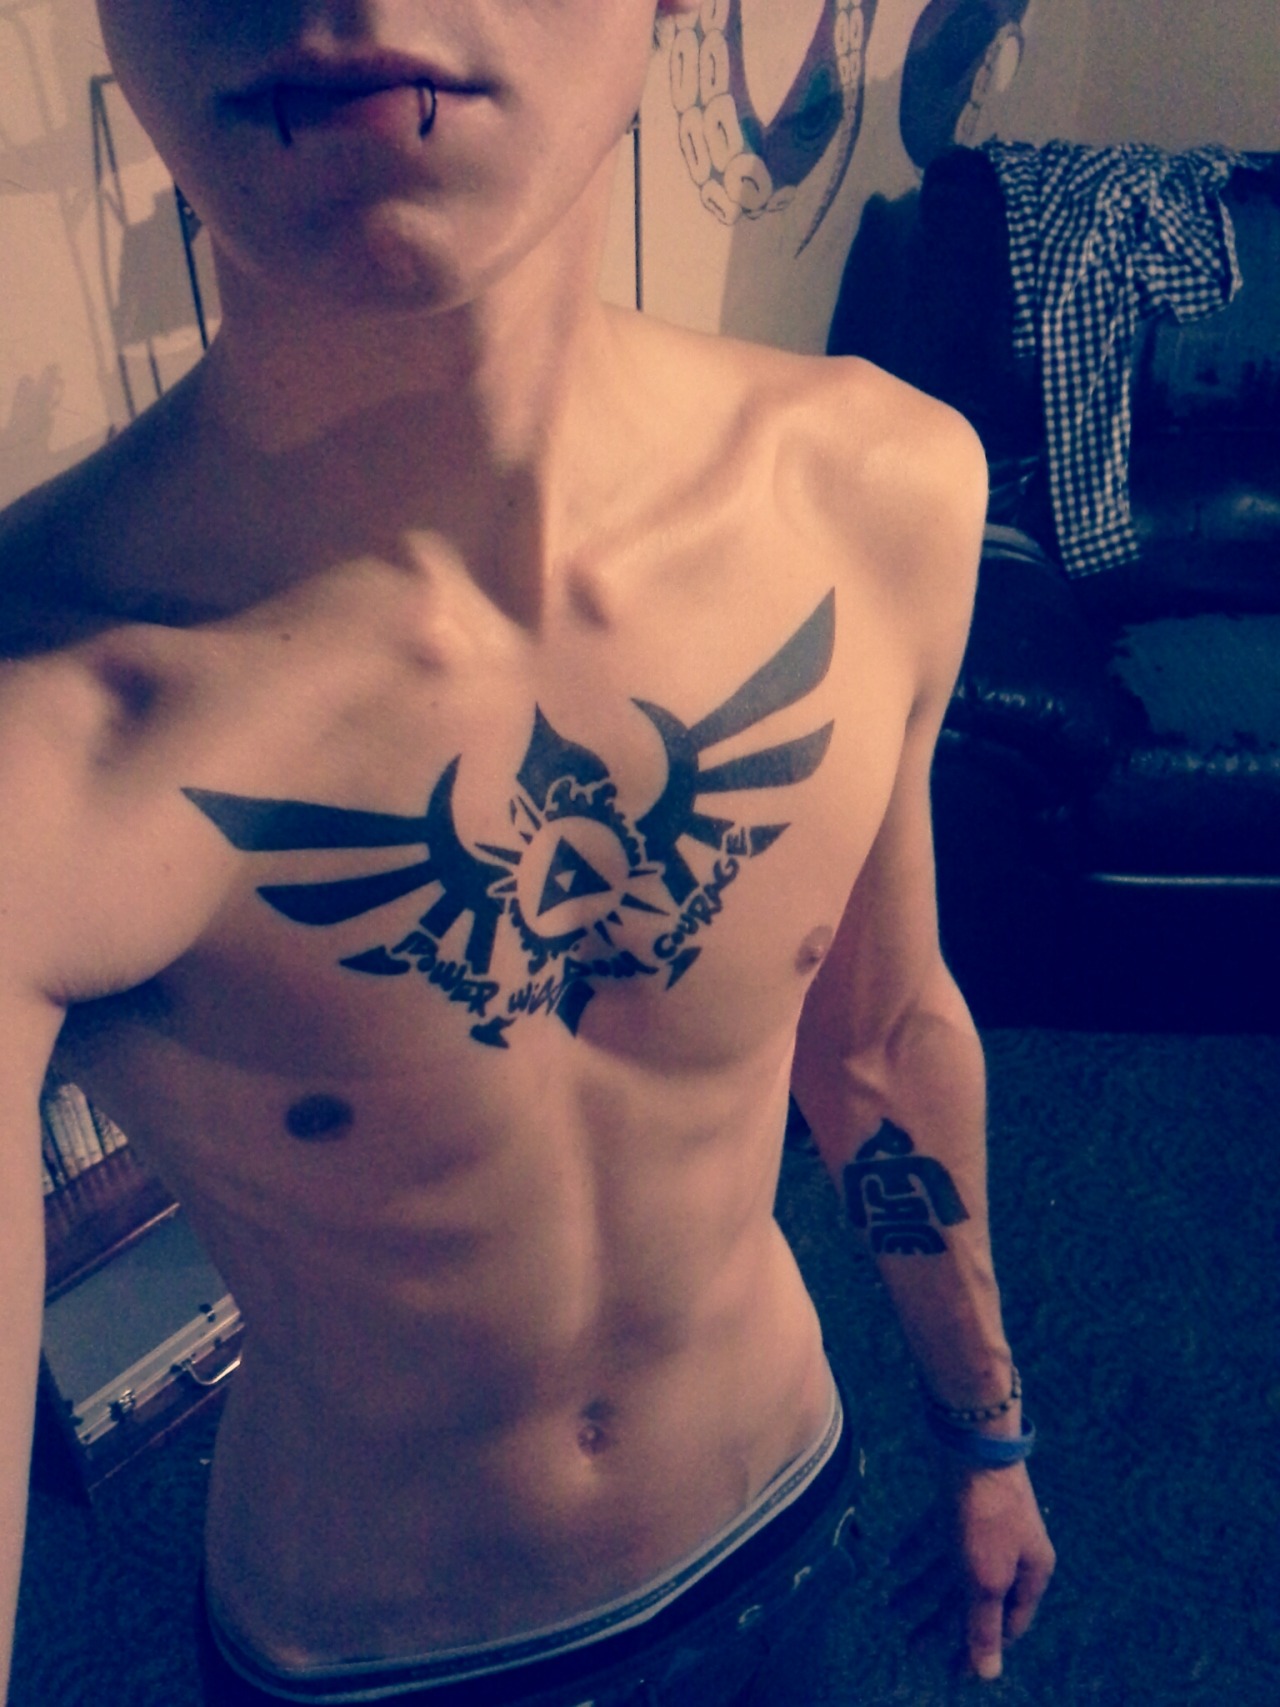 Triforce from Zelda with “Power, Wisdom and Courage” underneath. On my arm is the word “Peace” in the shape of a dove. Hope you like :)
submitted by http://caucaijon.tumblr.com